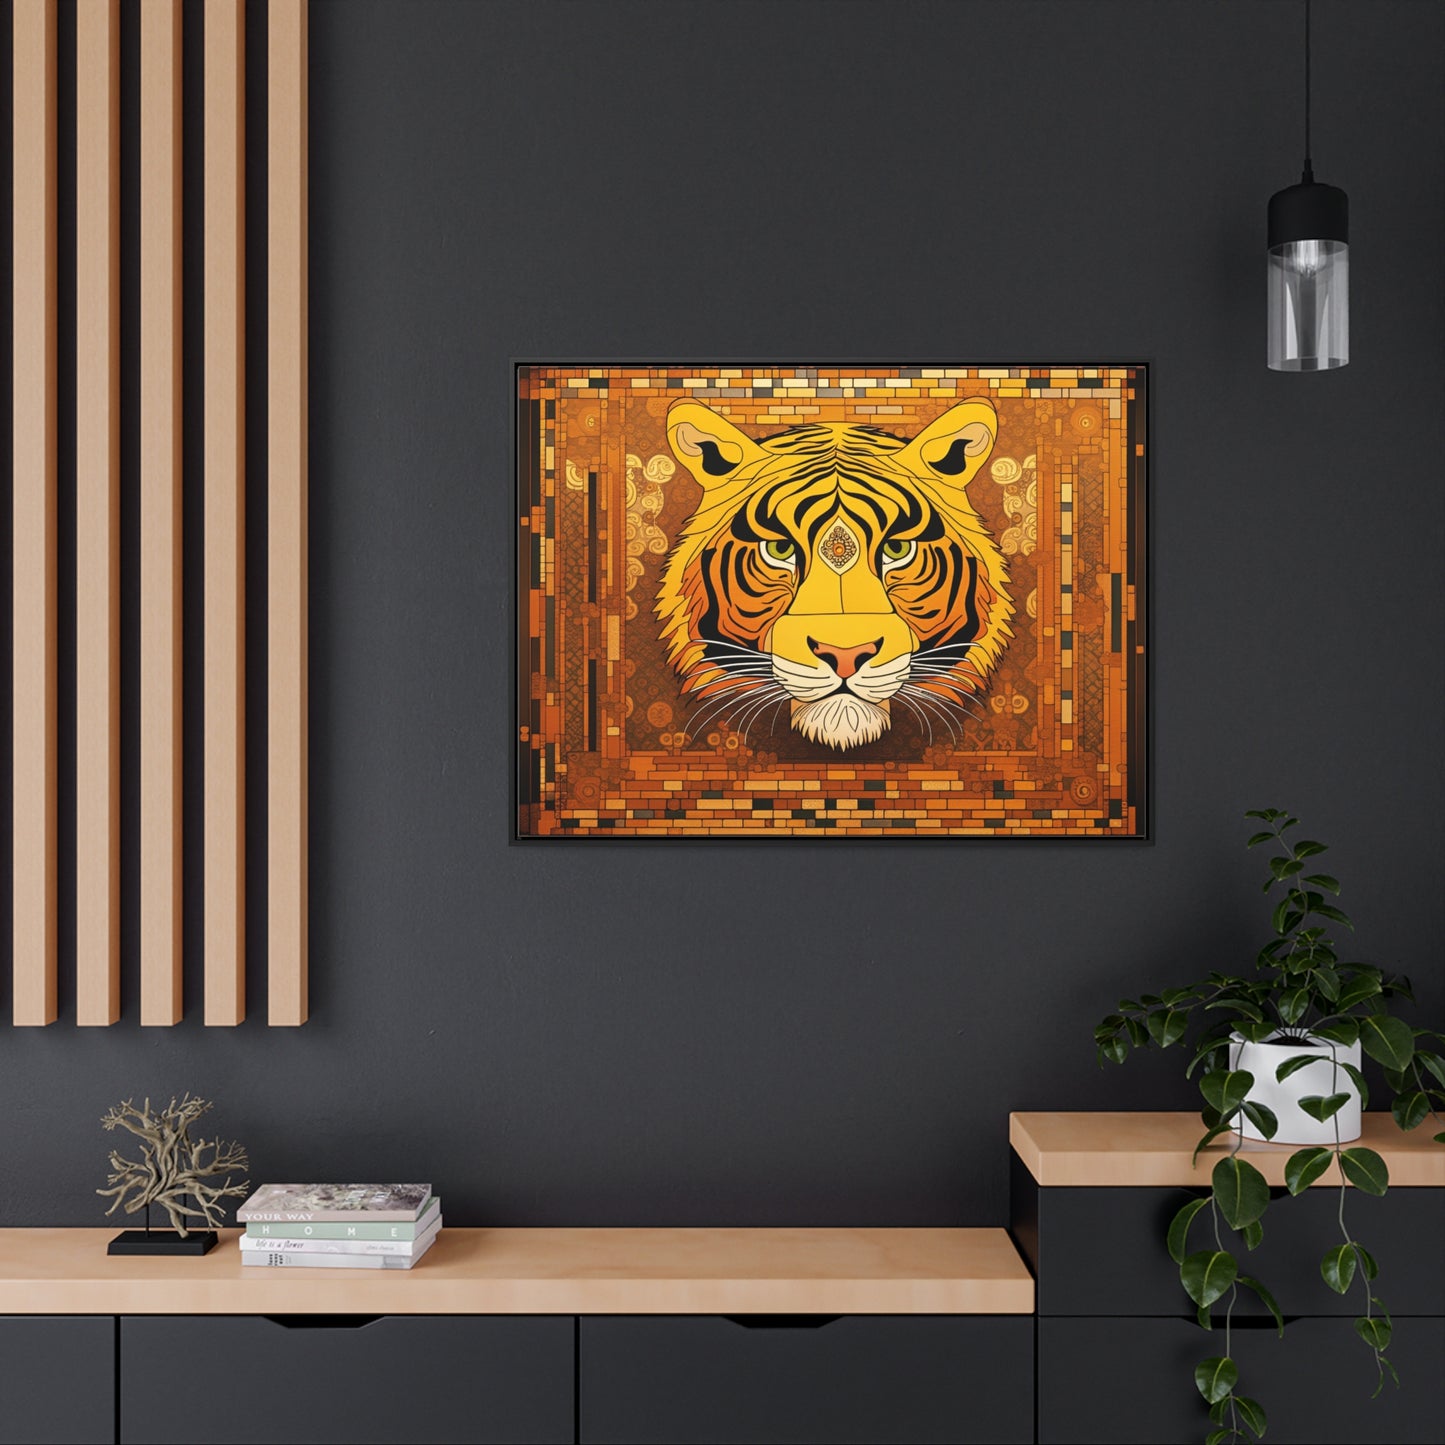 Tiger Head in the Style of Gustav Klimt Print on Canvas in a Floating Frame 40x30 hung on black wall